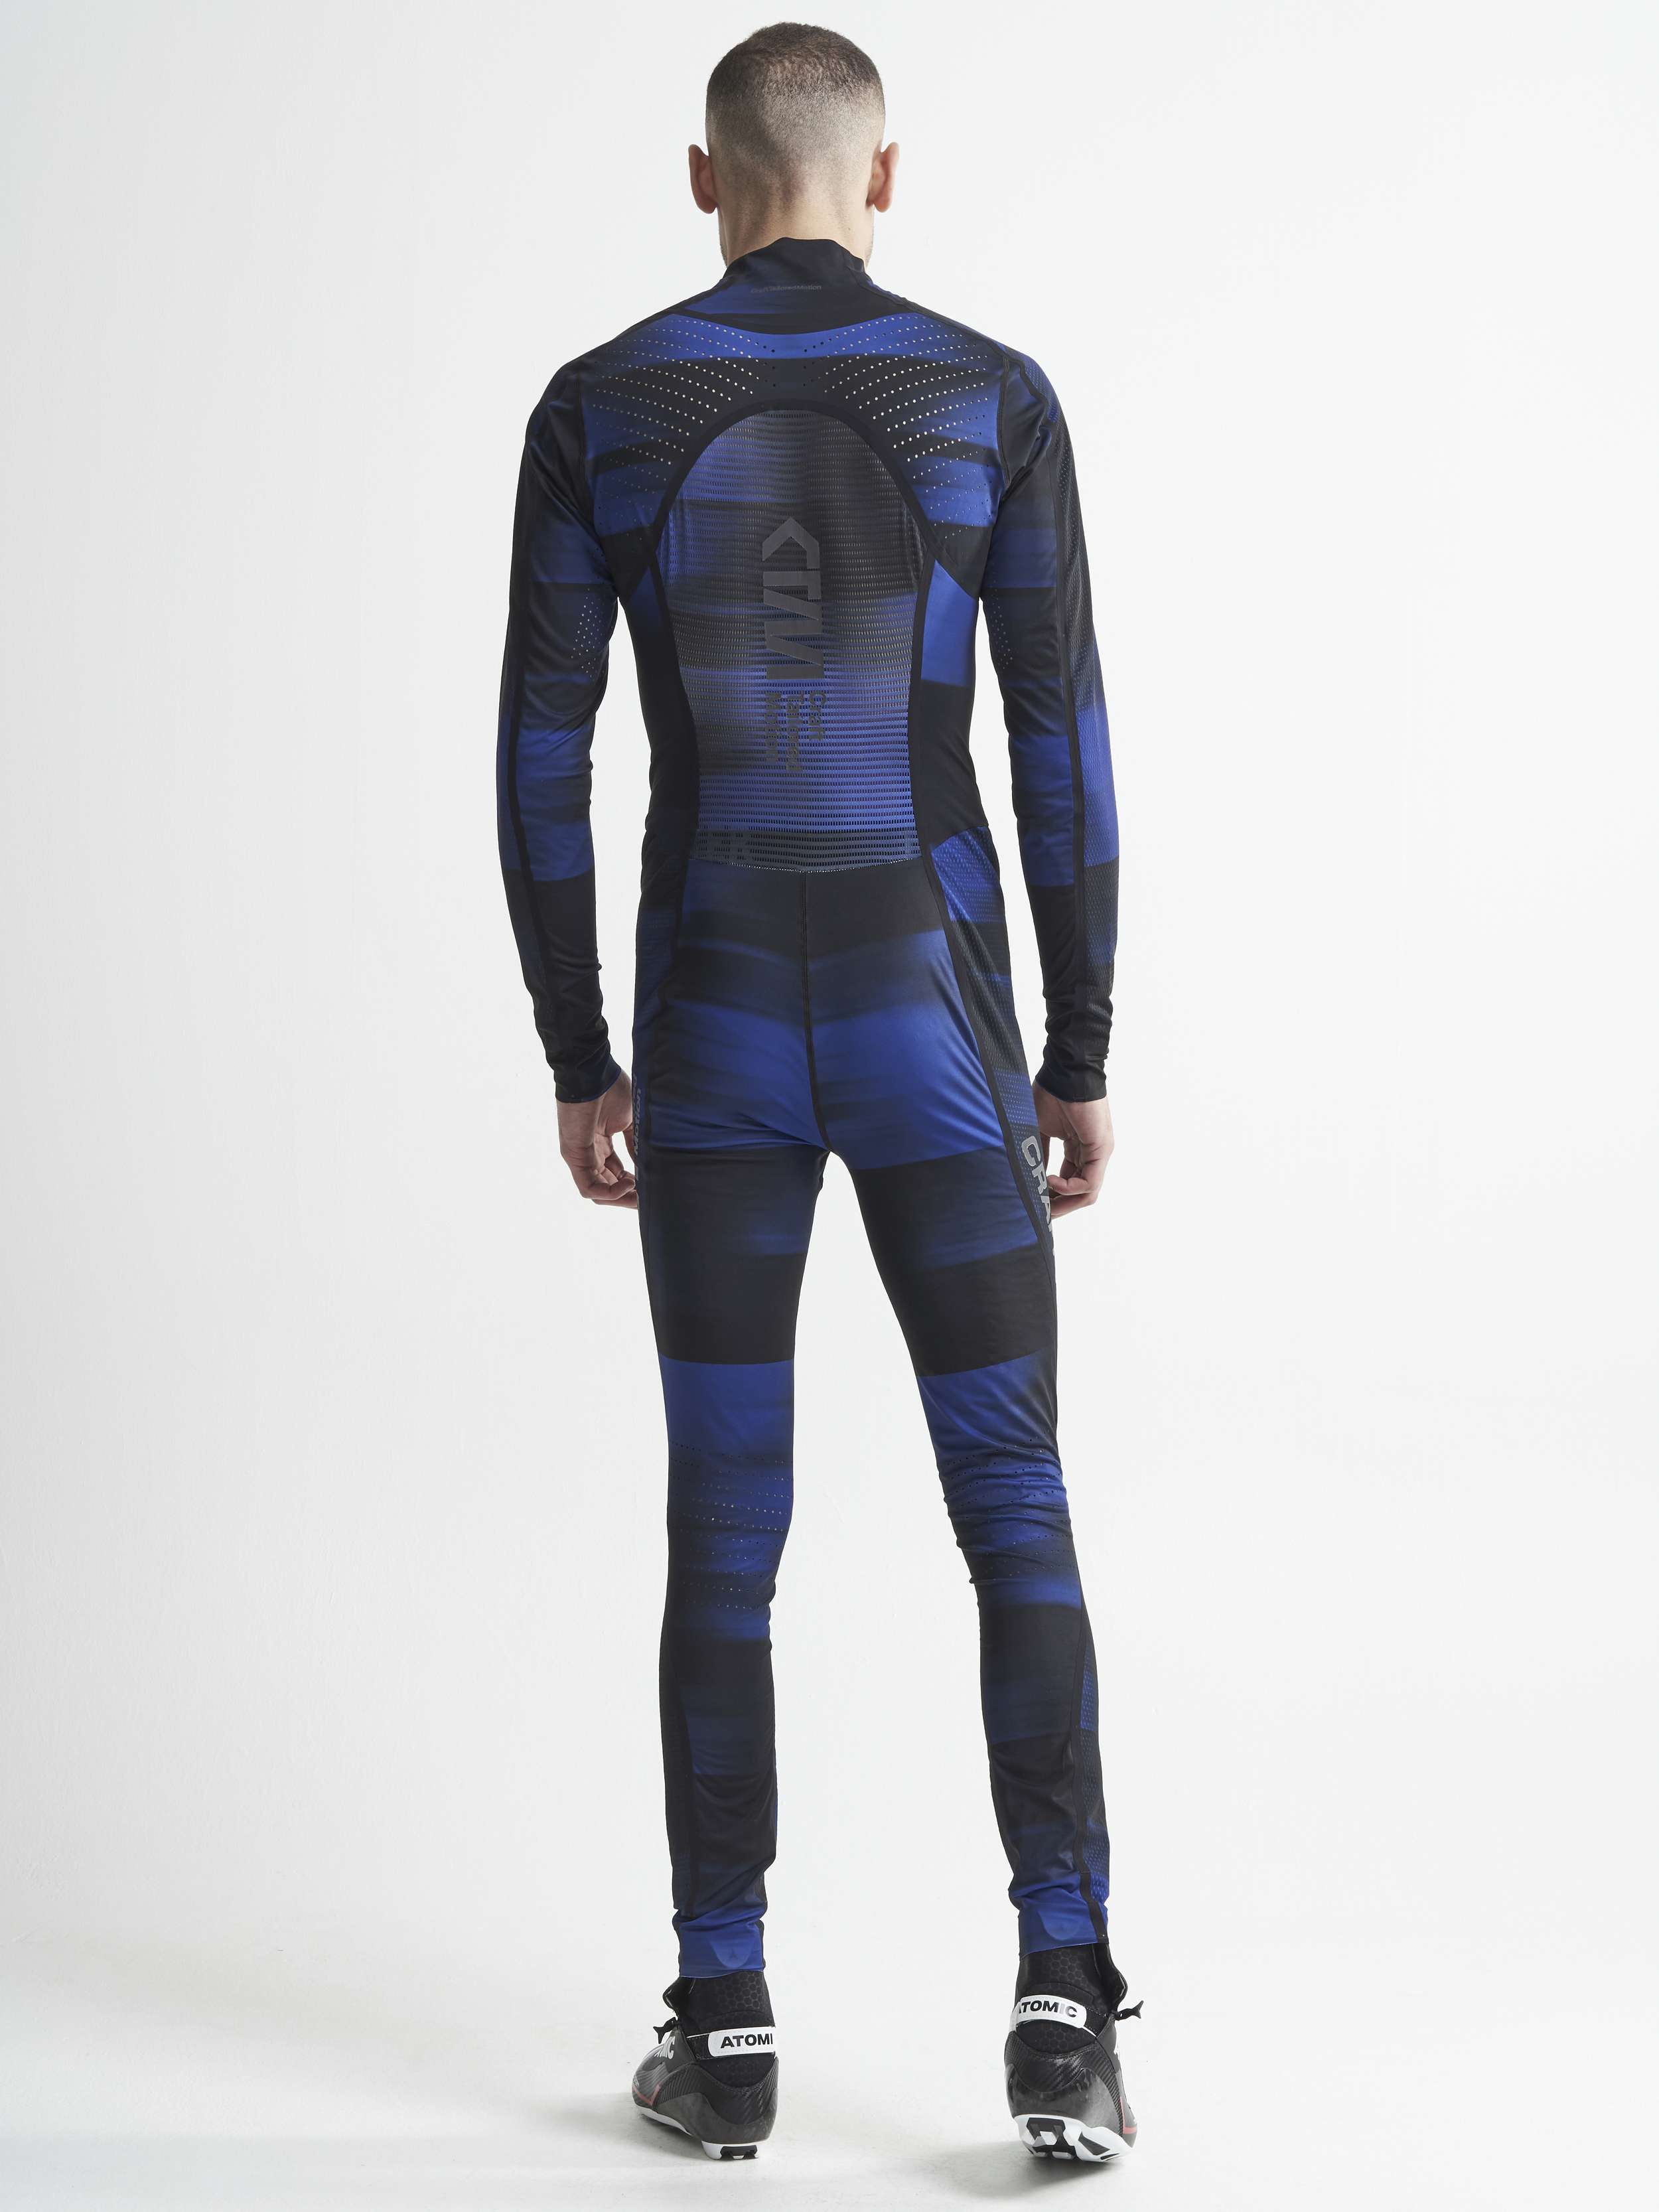 Swix Lycra Men's Pro Fit Two Piece Racing Suit | Cross Country Skier - Cross  Country skis, skating, boots, bindings, poles and waxes.